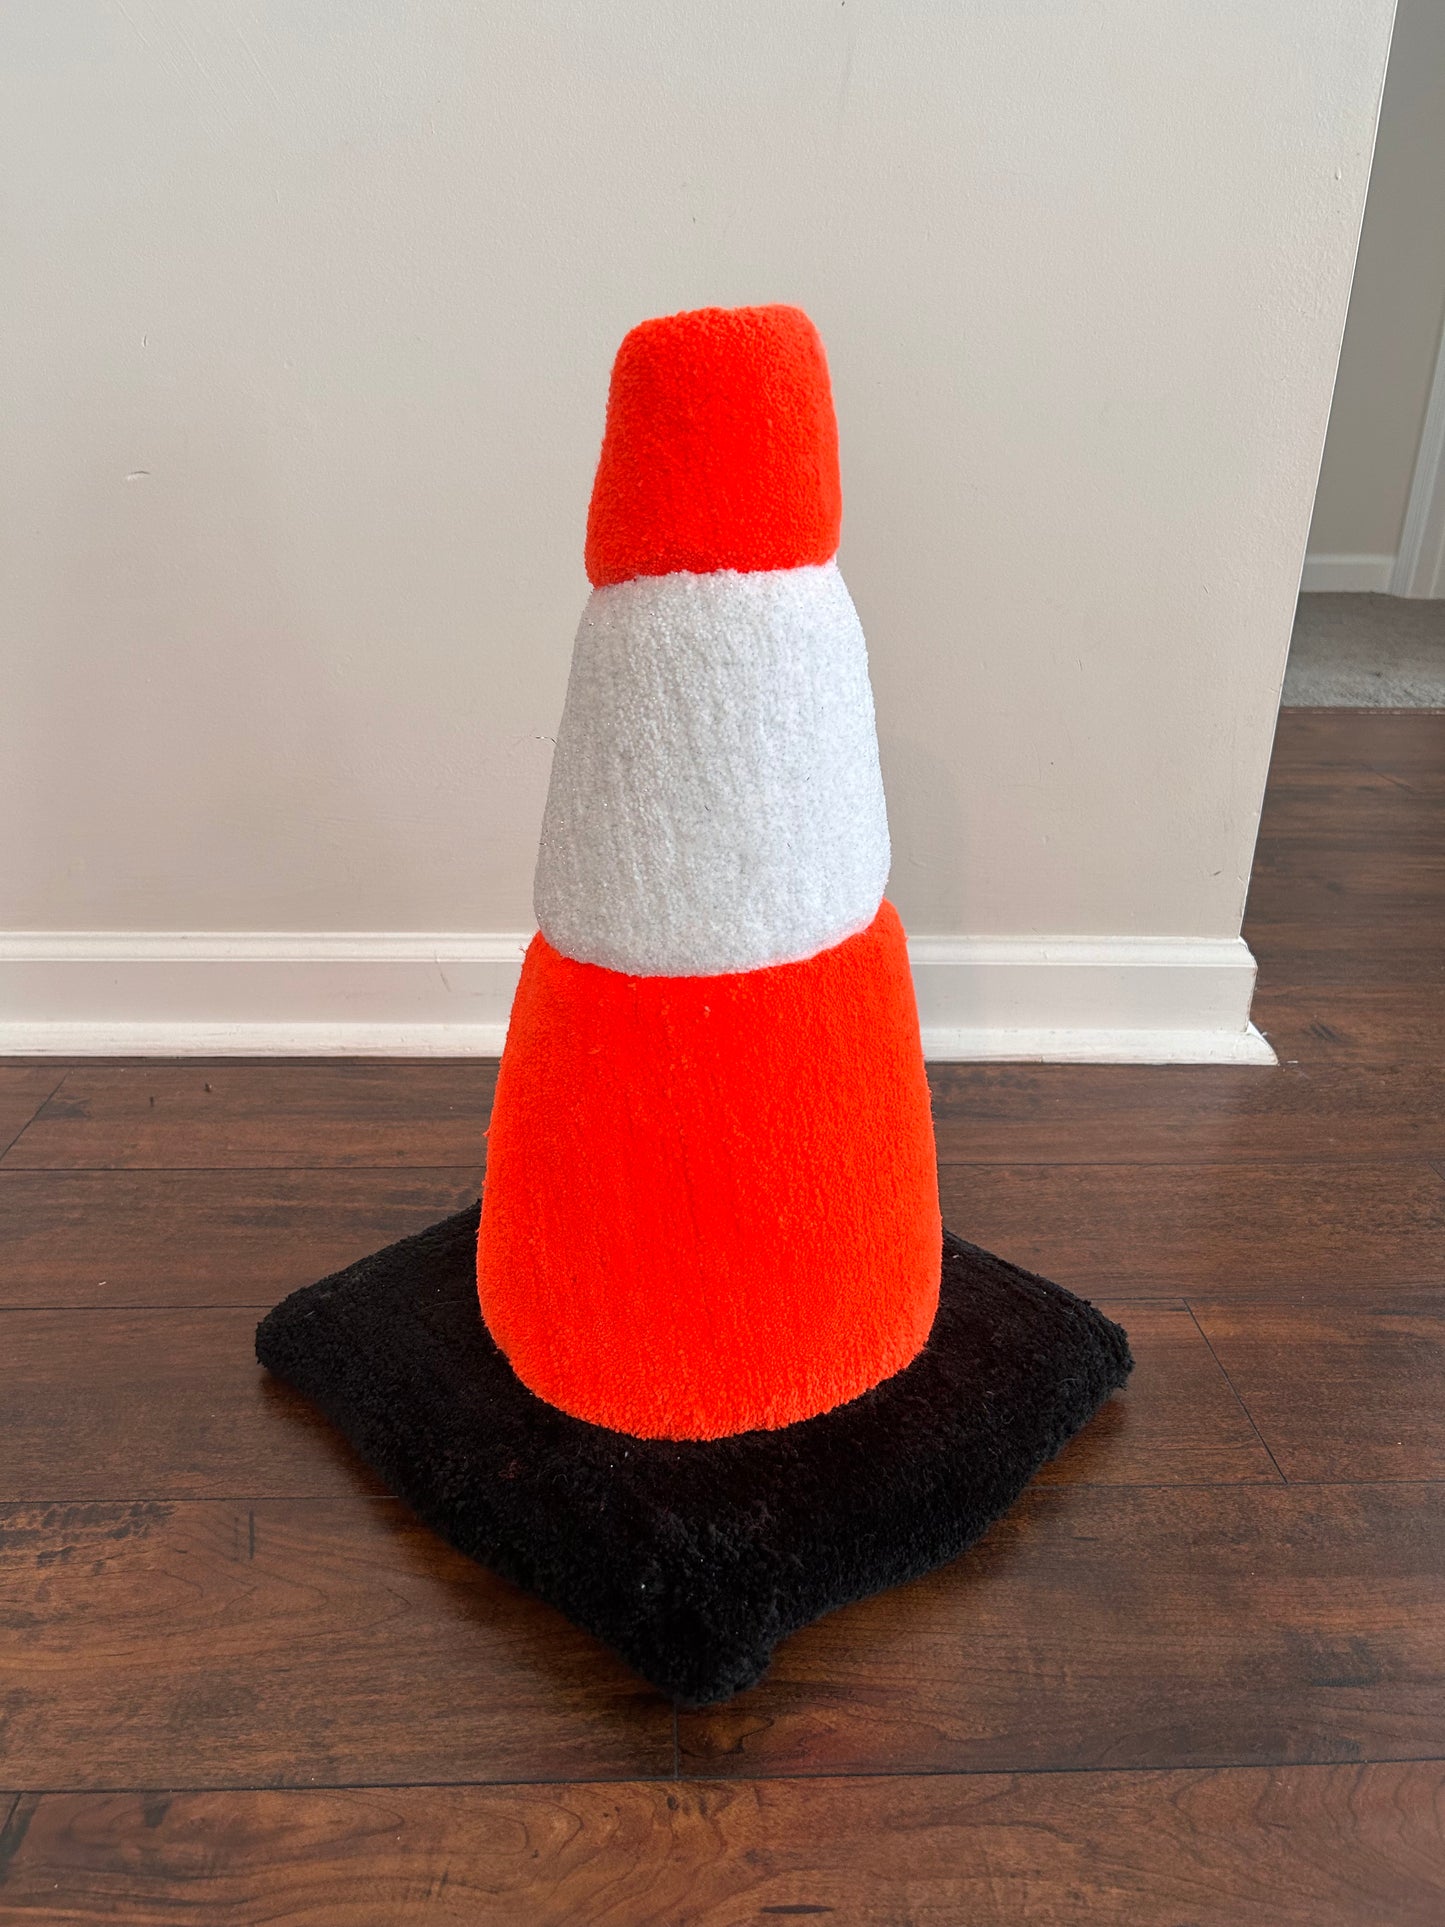 Emotional Support Traffic Cone